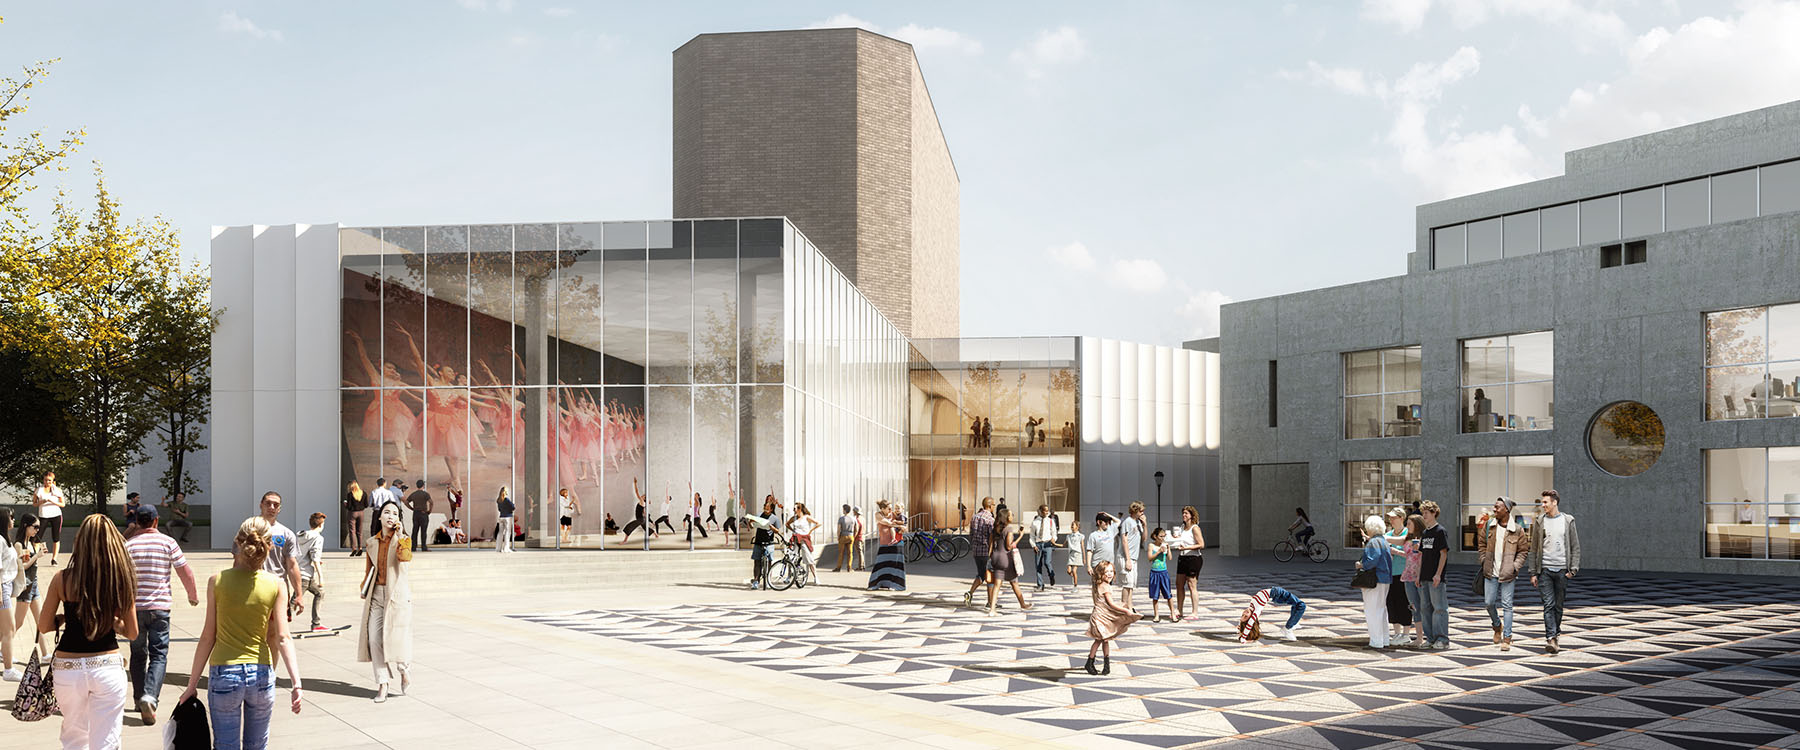 Design rendering of the Annenberg Center plaza during the daytime